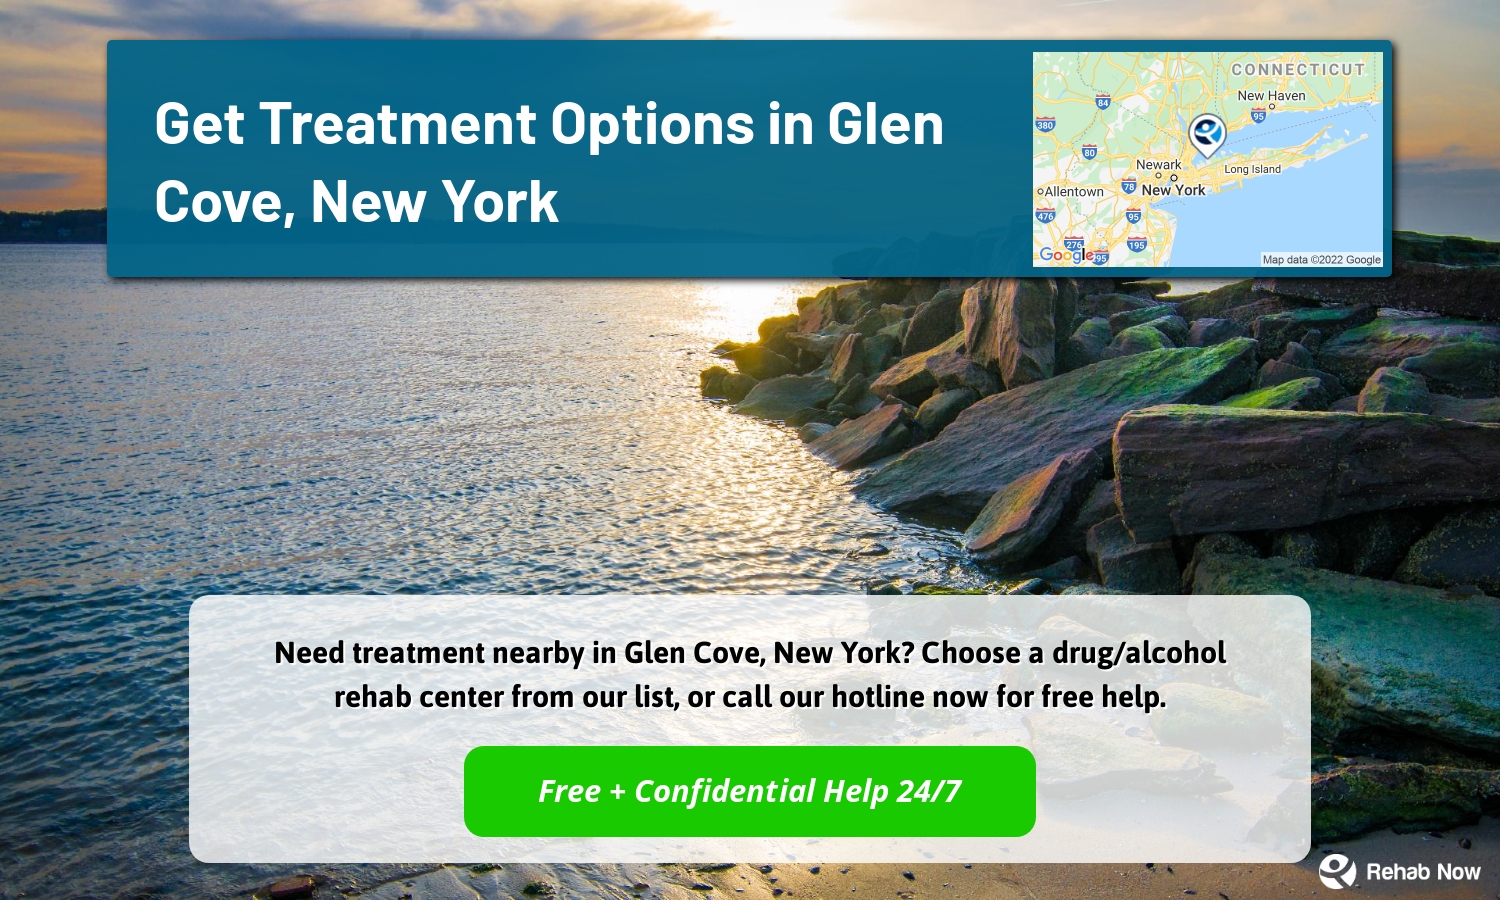 Need treatment nearby in Glen Cove, New York? Choose a drug/alcohol rehab center from our list, or call our hotline now for free help.